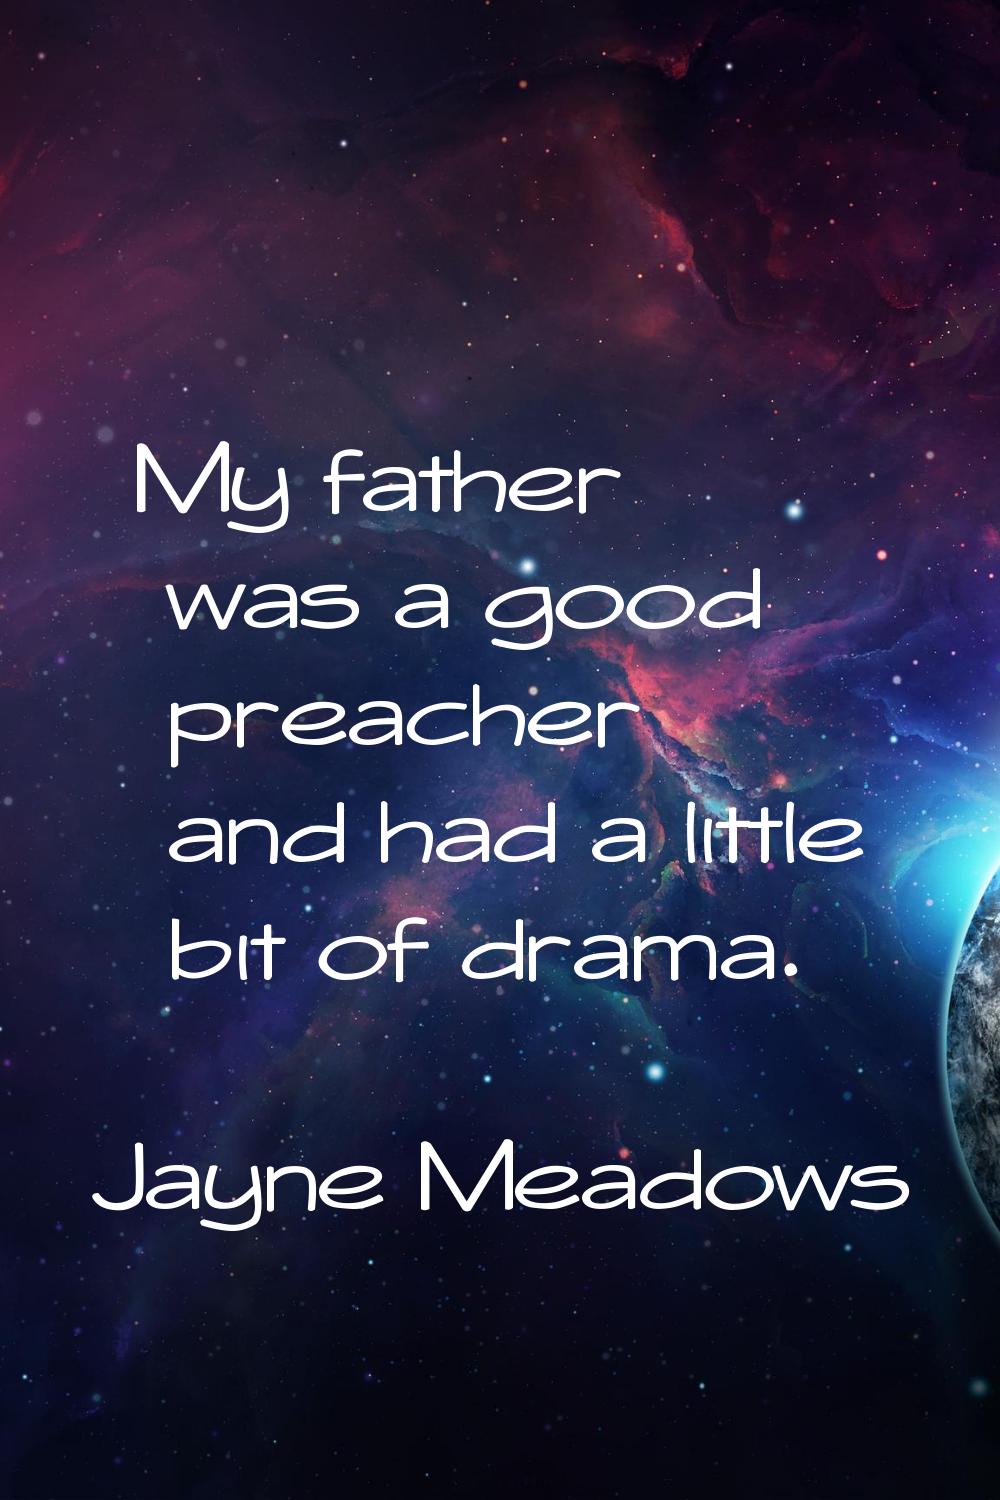 My father was a good preacher and had a little bit of drama.